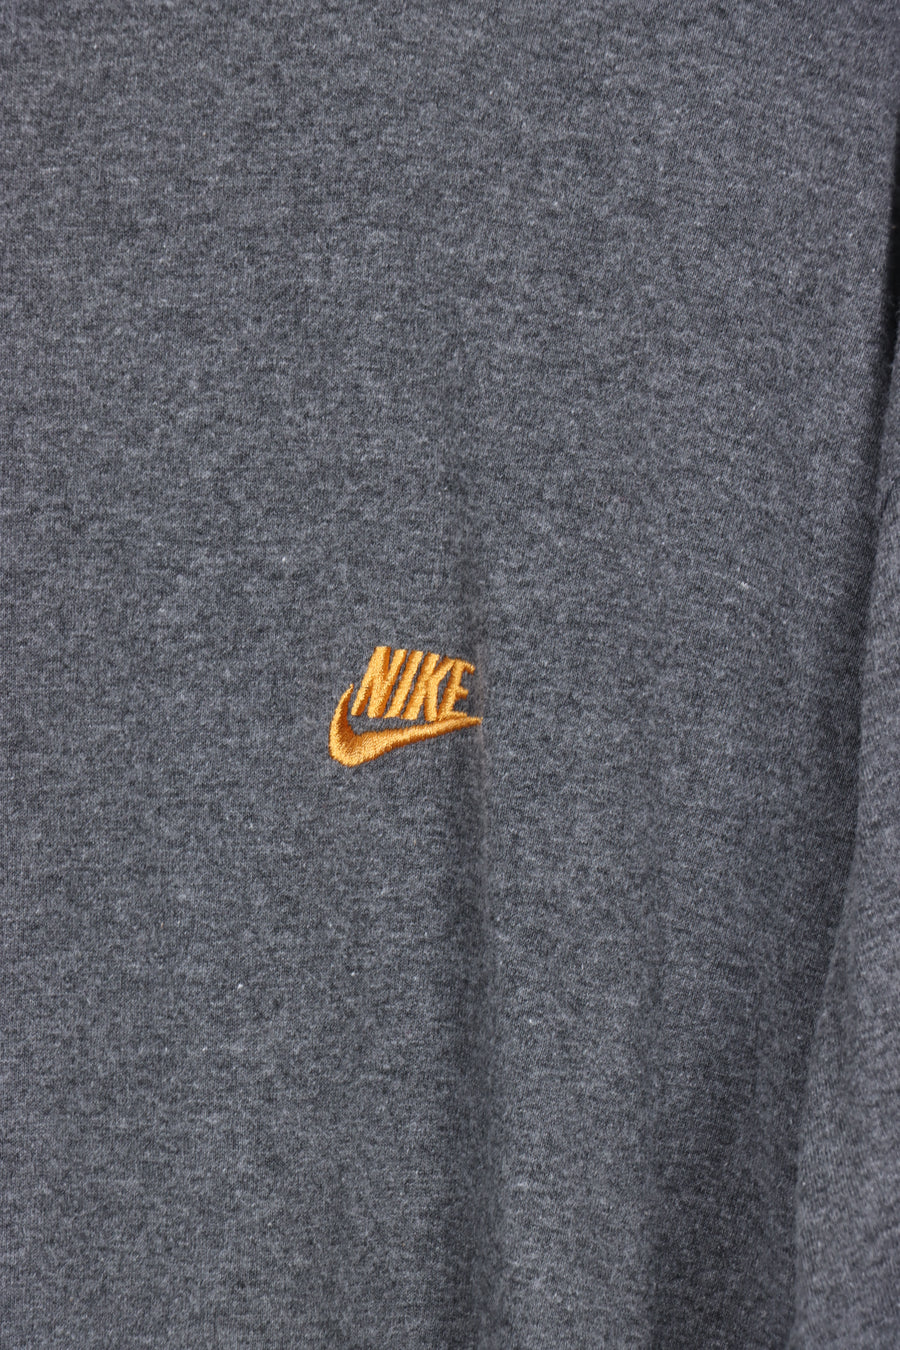 NIKE Embroidered Grey & Mustard Ringer Tee (XL)